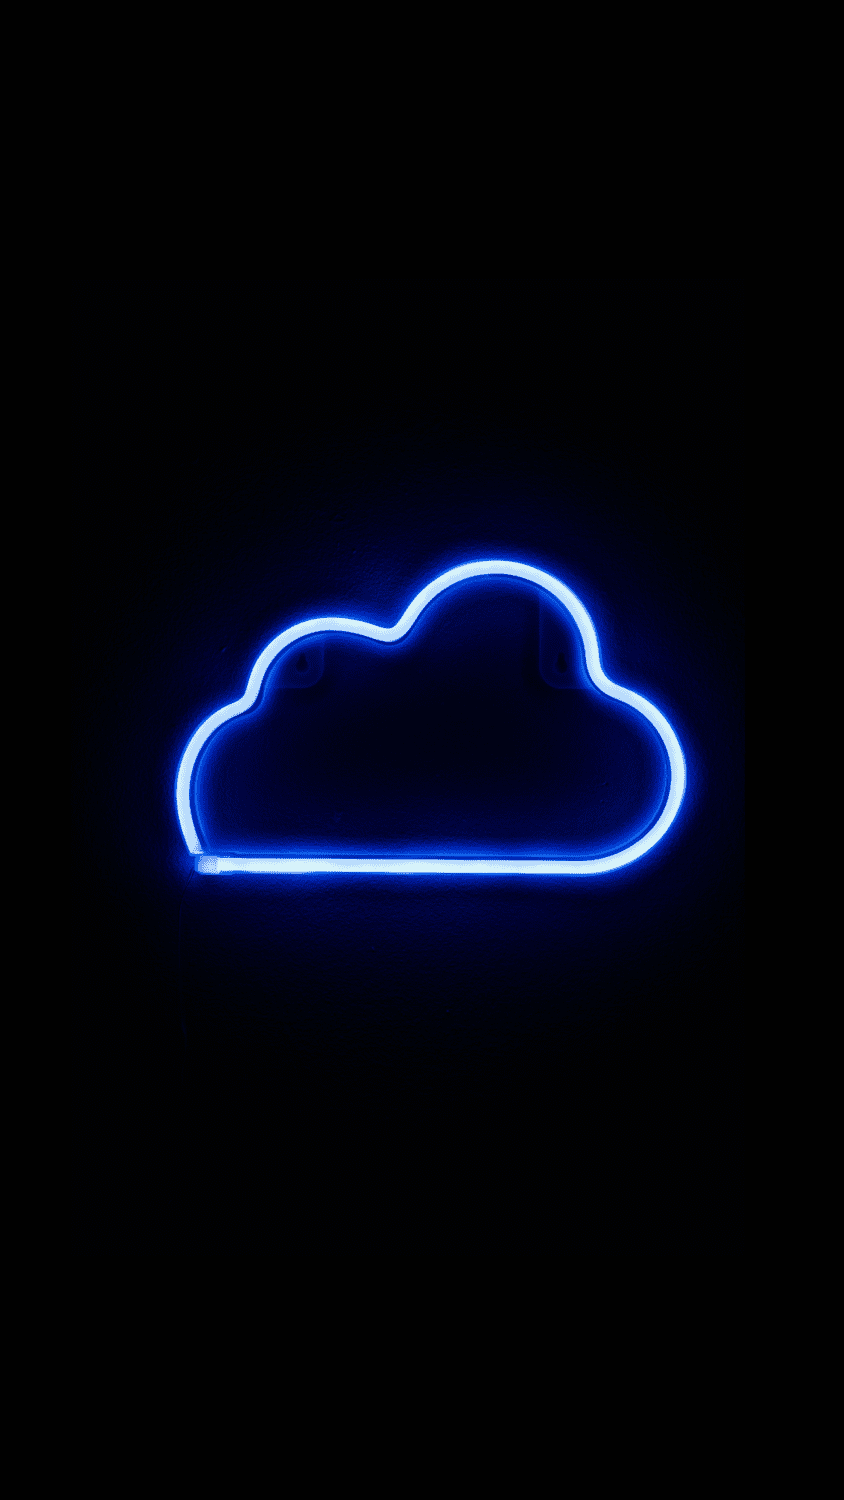 A blue neon sign in the shape of a cloud - Neon blue